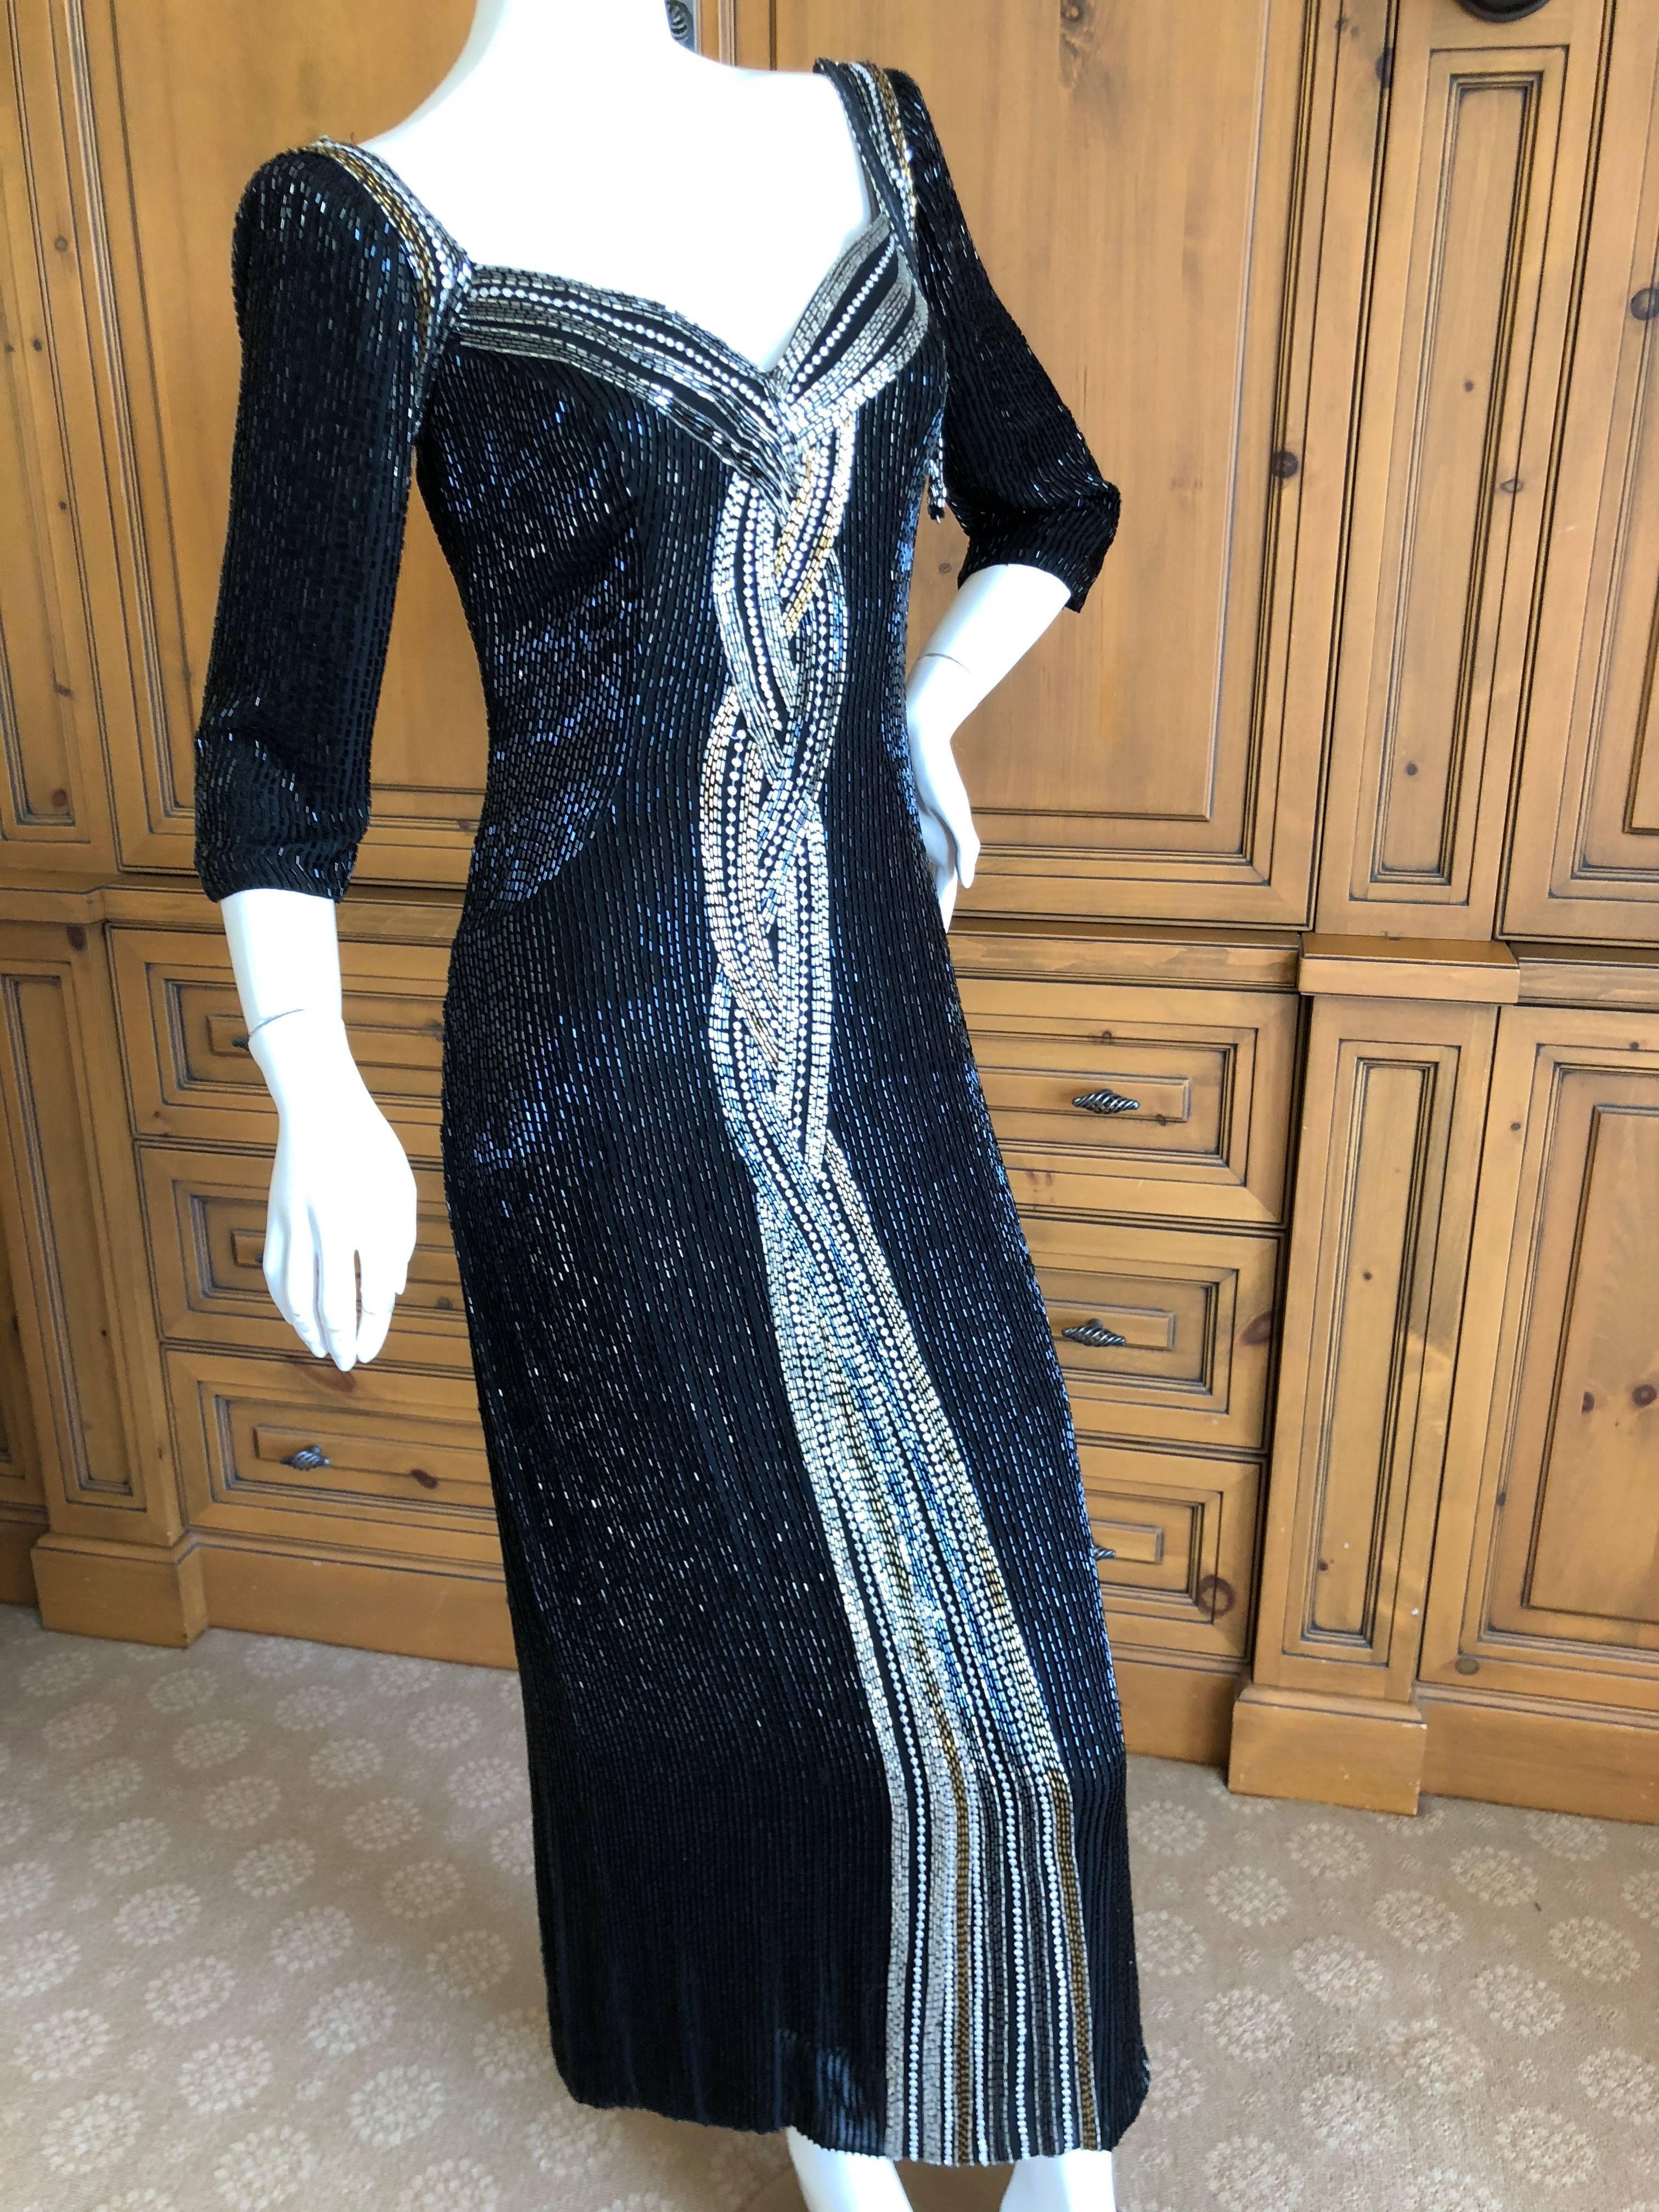 Bob Mackie Black Bugle Beaded Waterfall Evening Dress In Excellent Condition For Sale In Cloverdale, CA